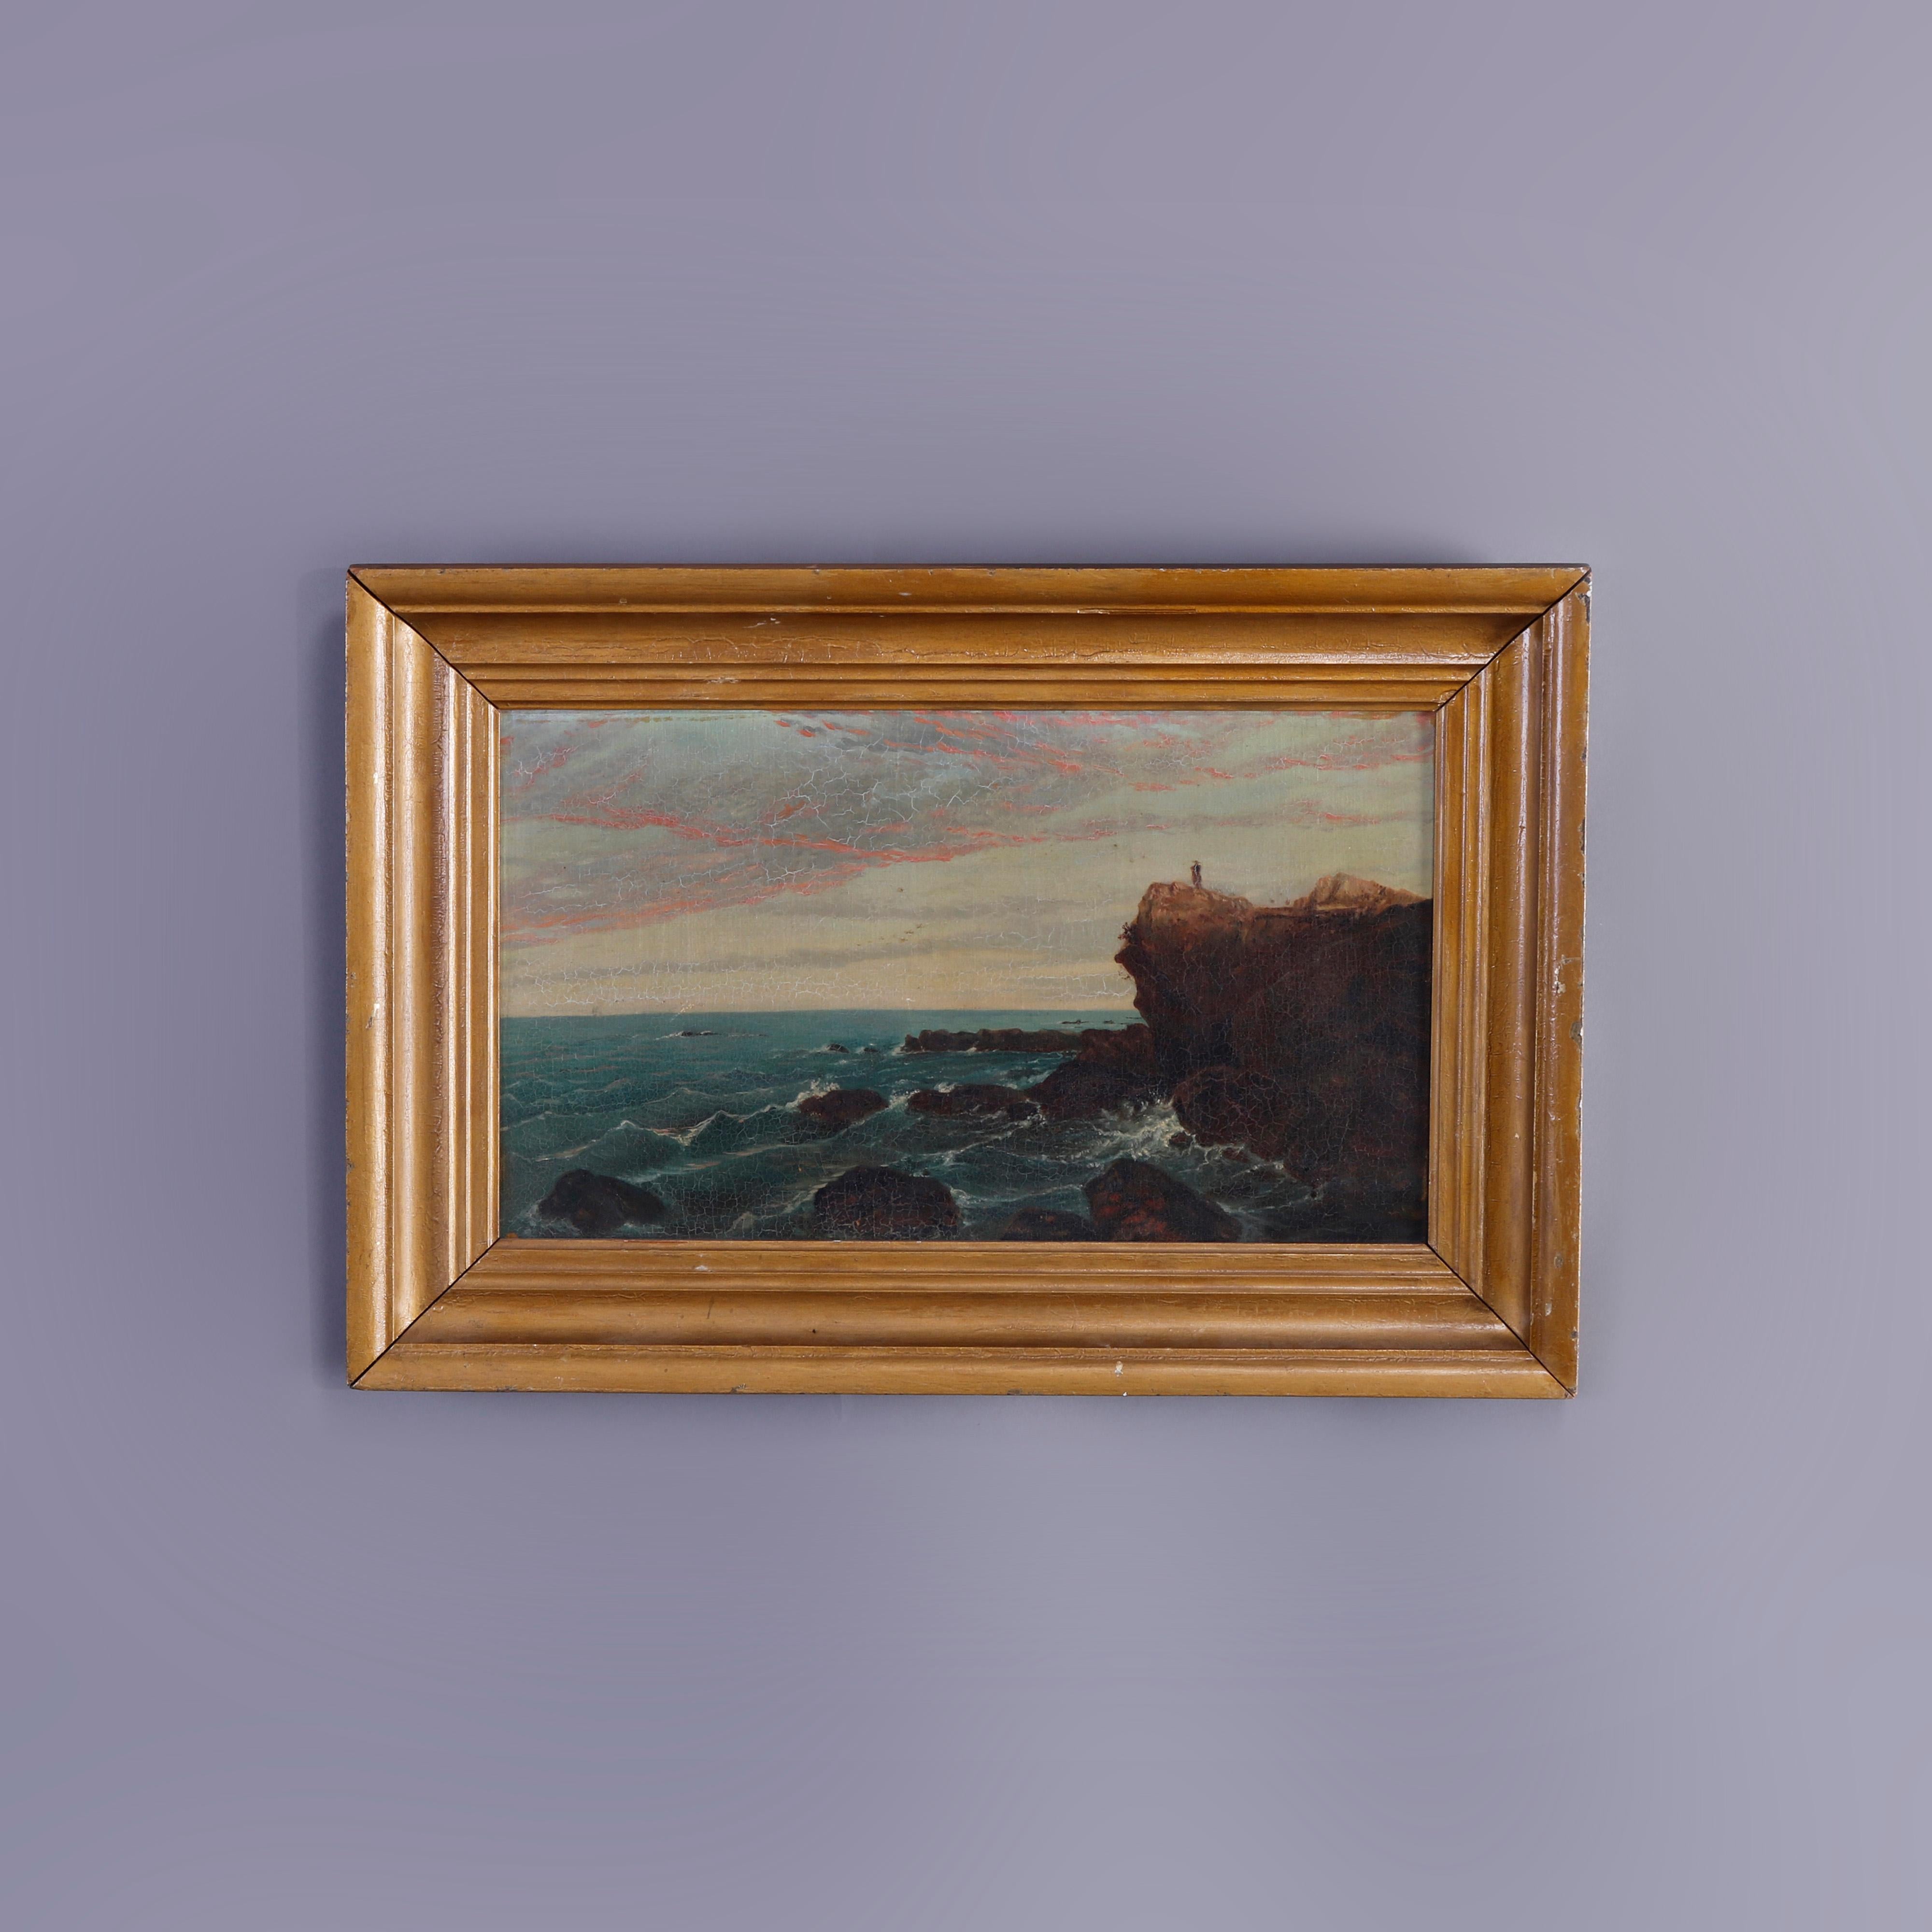 An antique painting offers oil on canvas rocky coastal seascape with figure standing on cliff overlooking the ocean, seated in giltwood frame, circa 1840

Measures - overall 17'' H x 25'' W x 2'' D; sight 19.5'' x 11.5''.